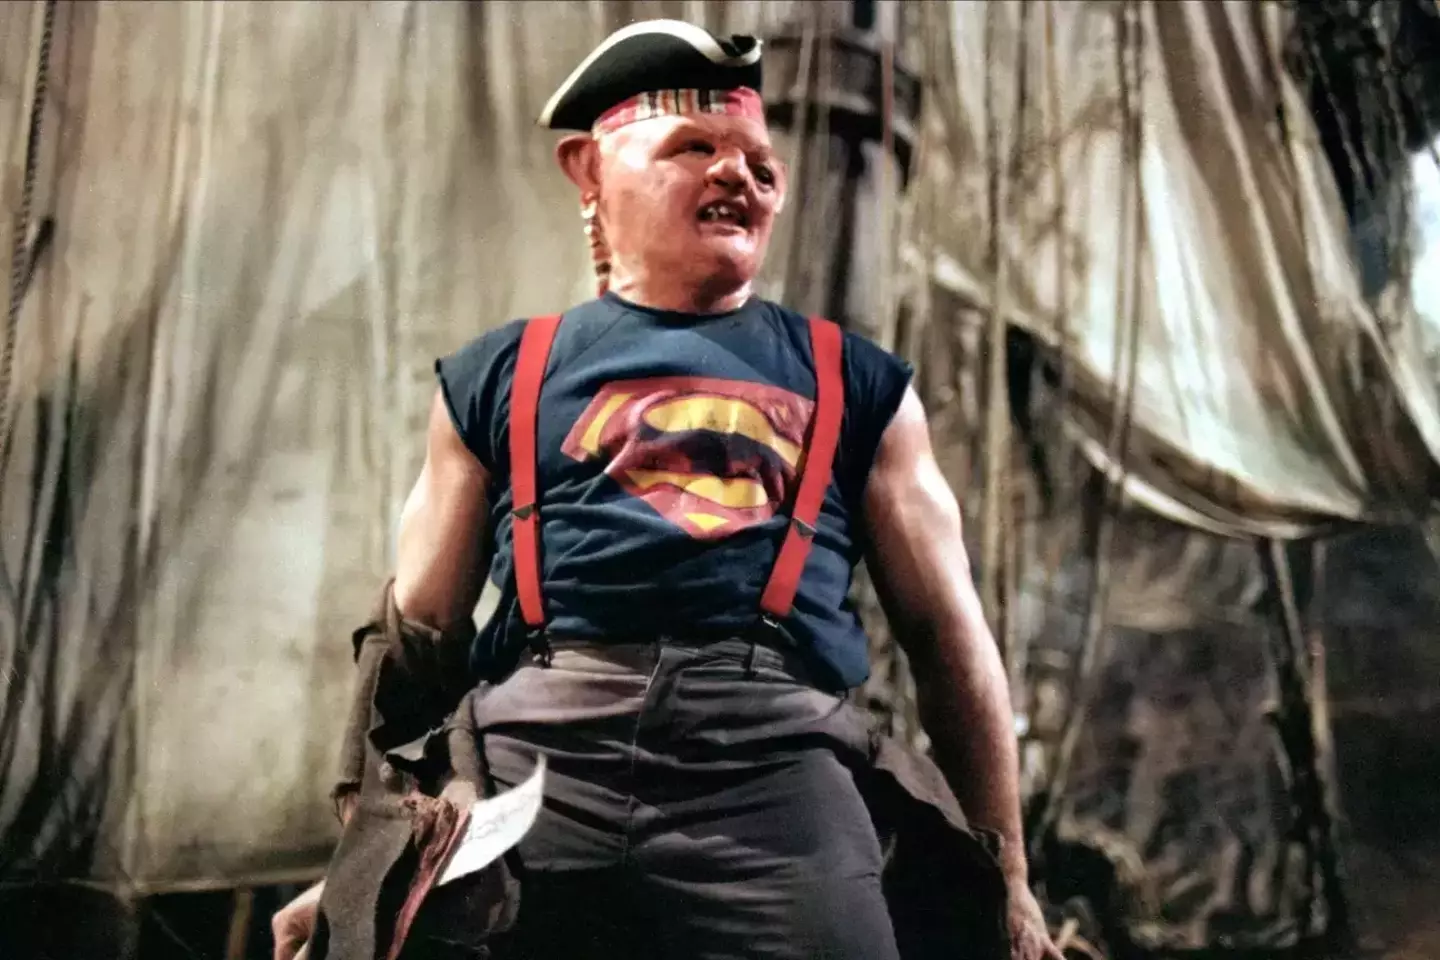 The actor who played Sloth in The Goonies battled through tragedy throughout his short life.